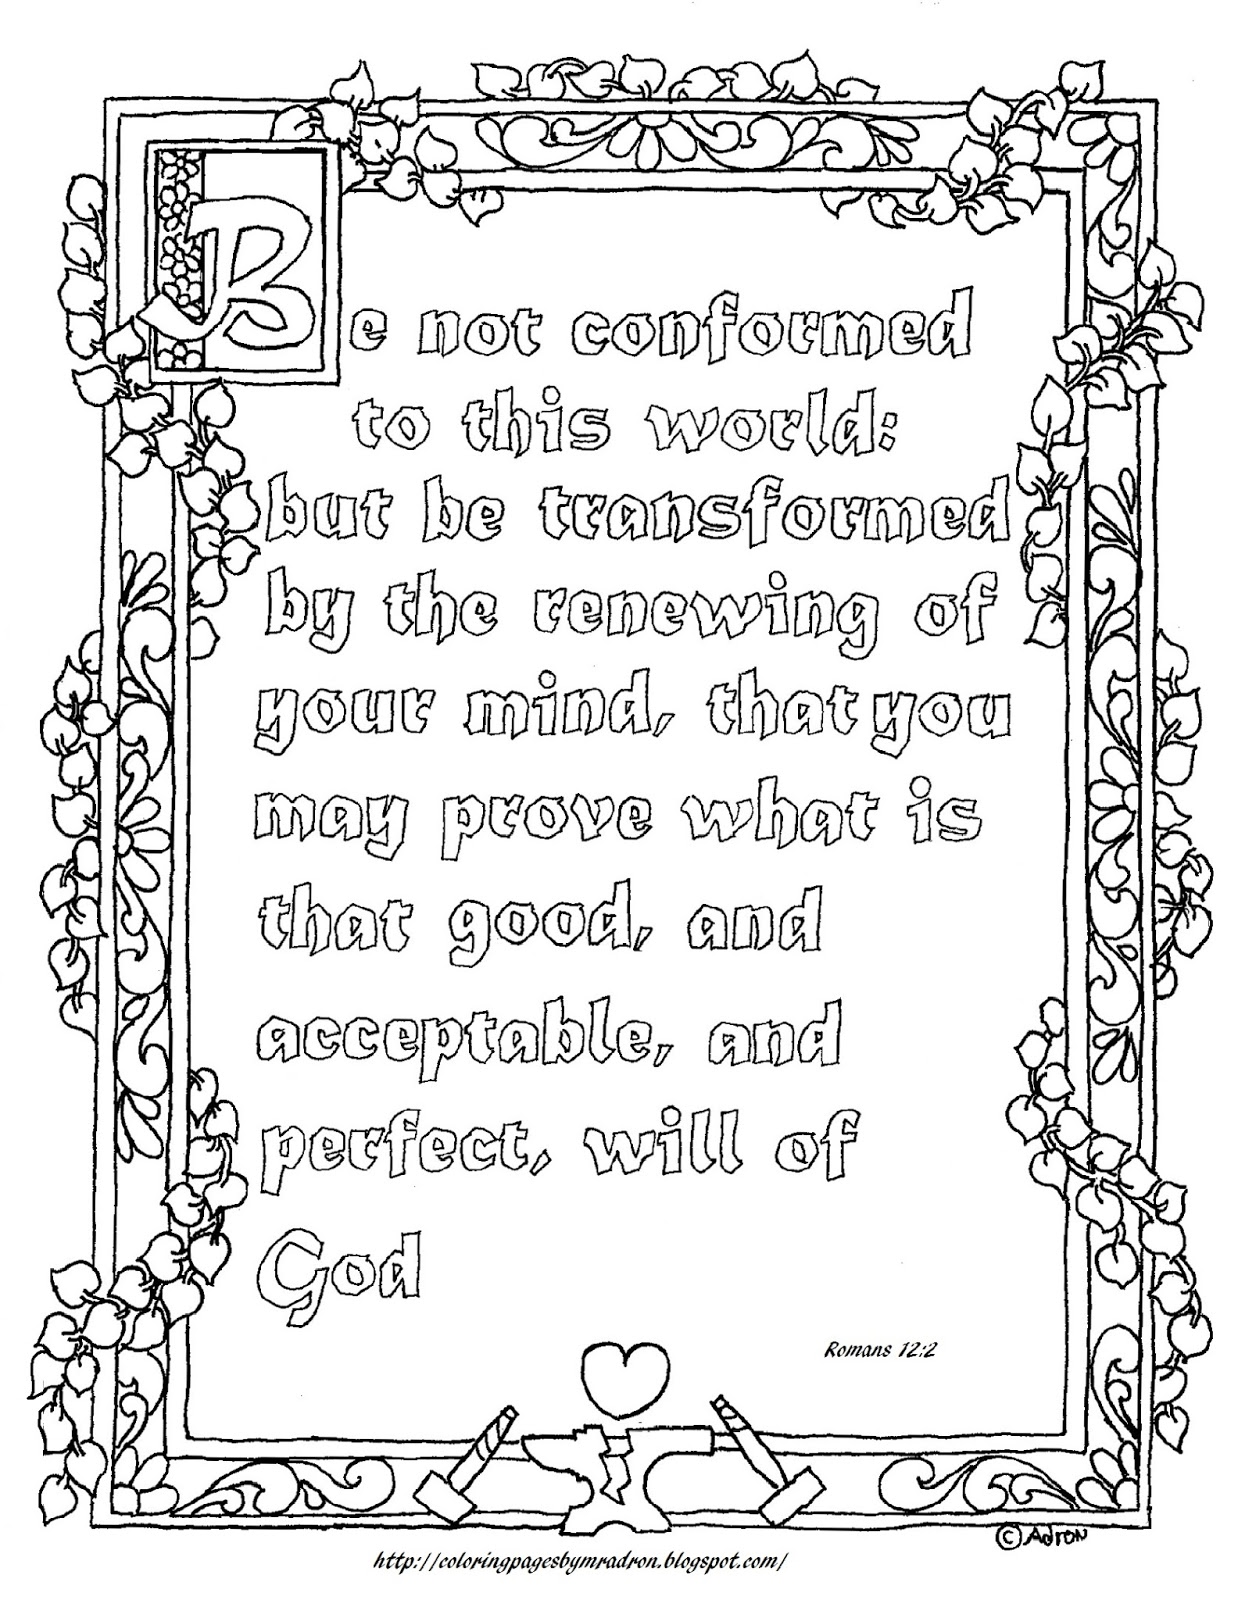 Coloring Pages For Kids By Mr Adron Free Printable Romans 12 2 